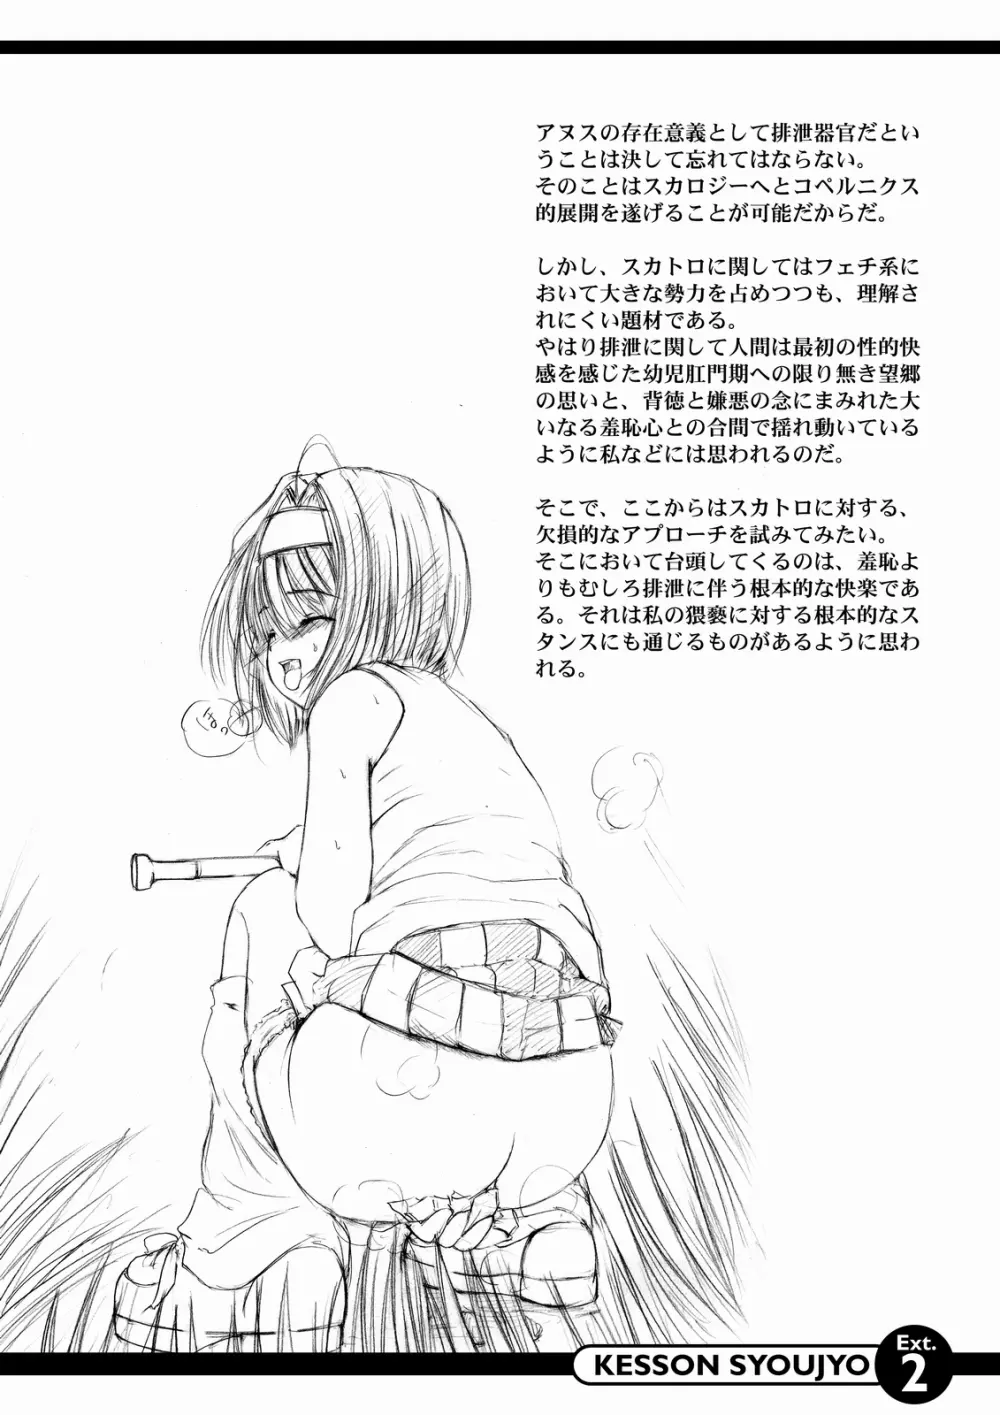 extra.2 純粋淫性批判 - page6